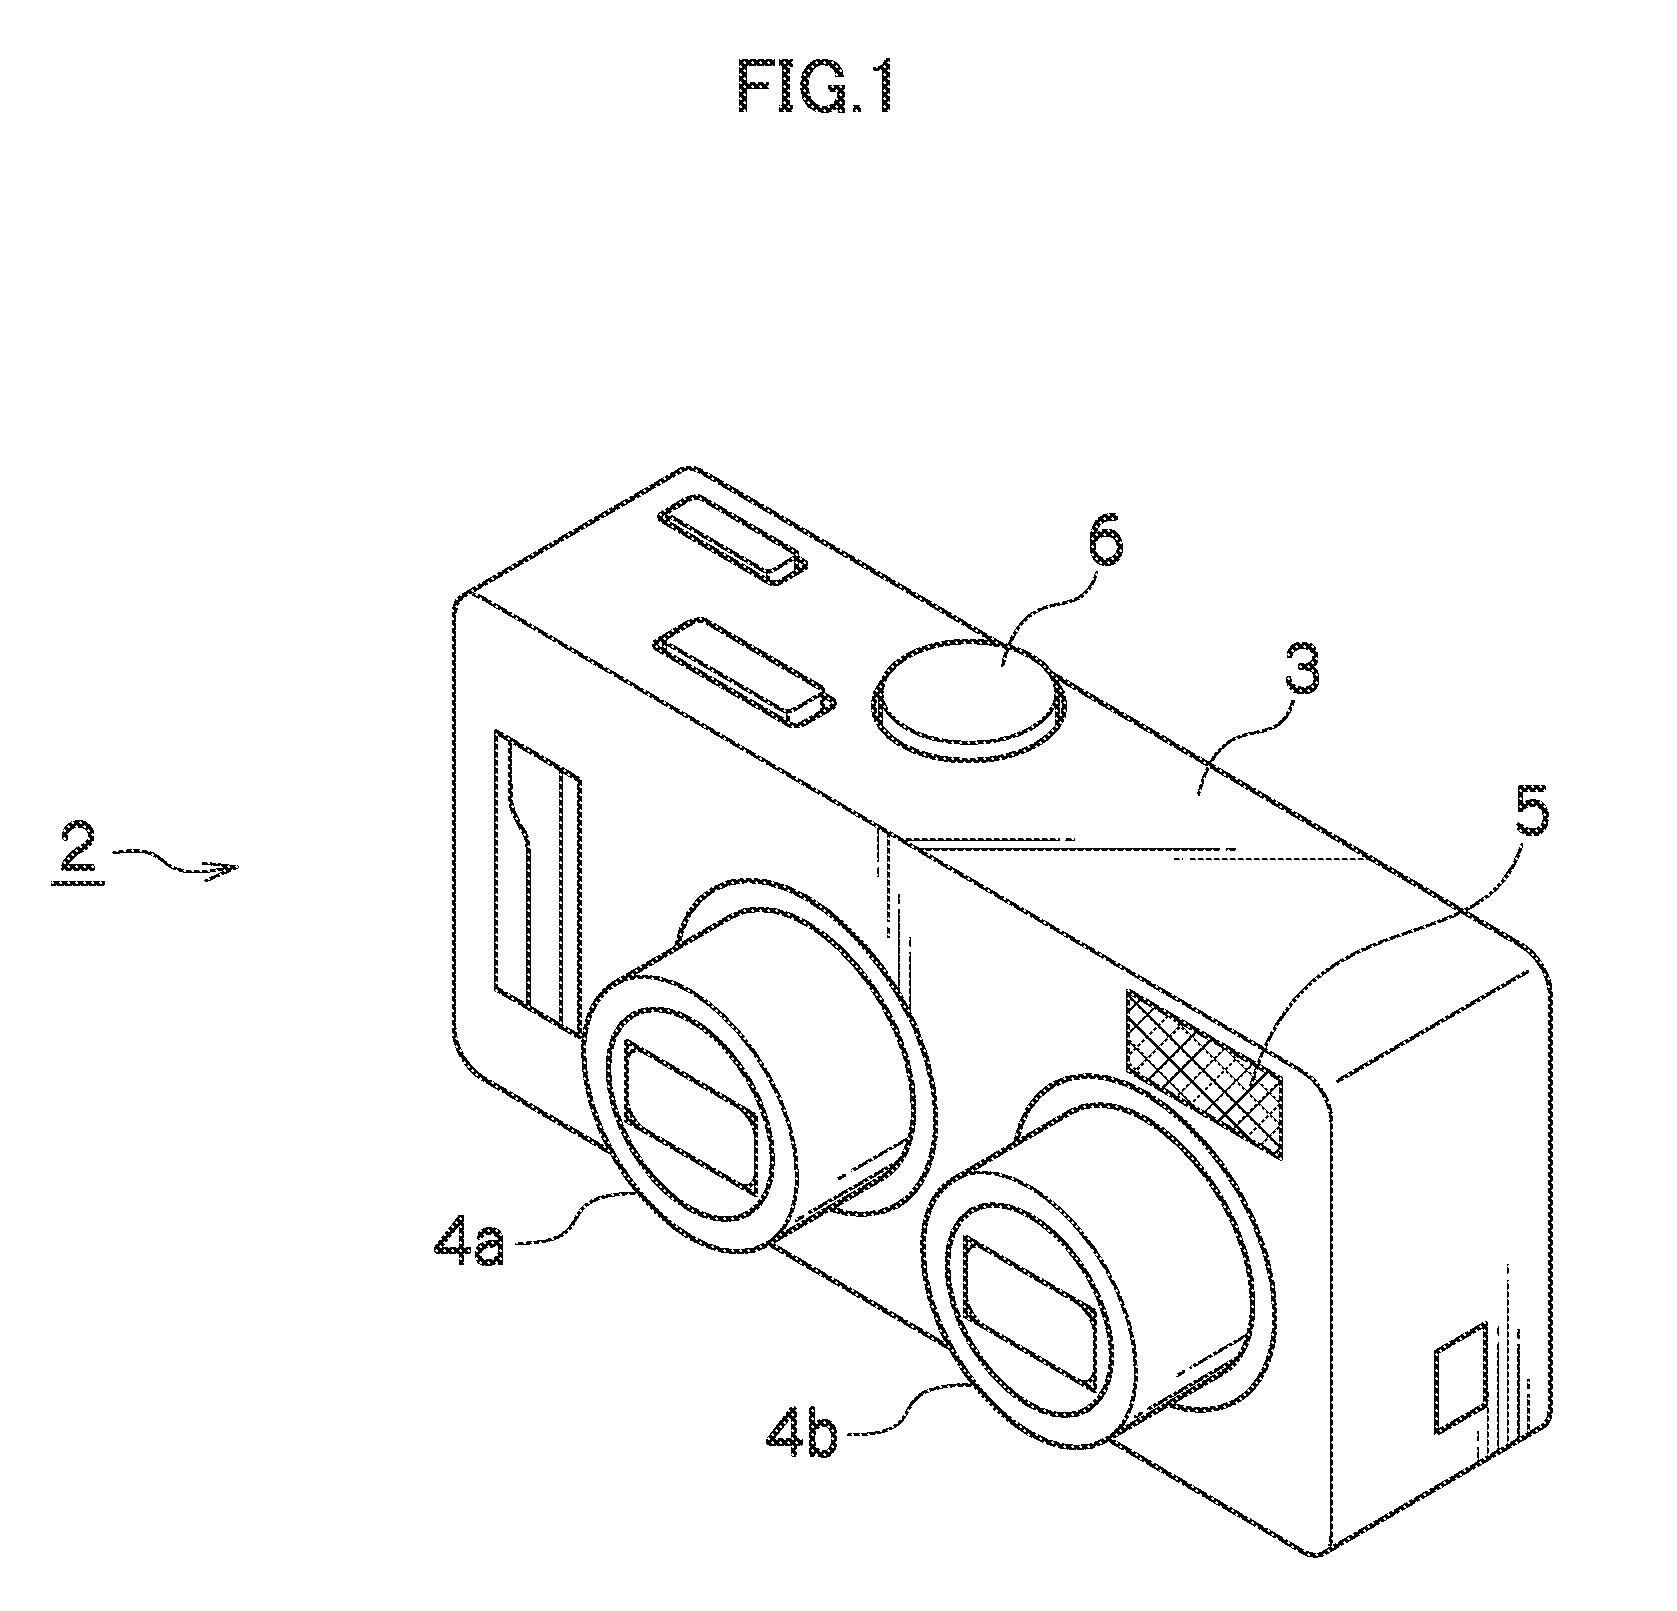 Imaging device, imaging method and recording medium for adjusting imaging conditions of optical systems based on viewpoint images